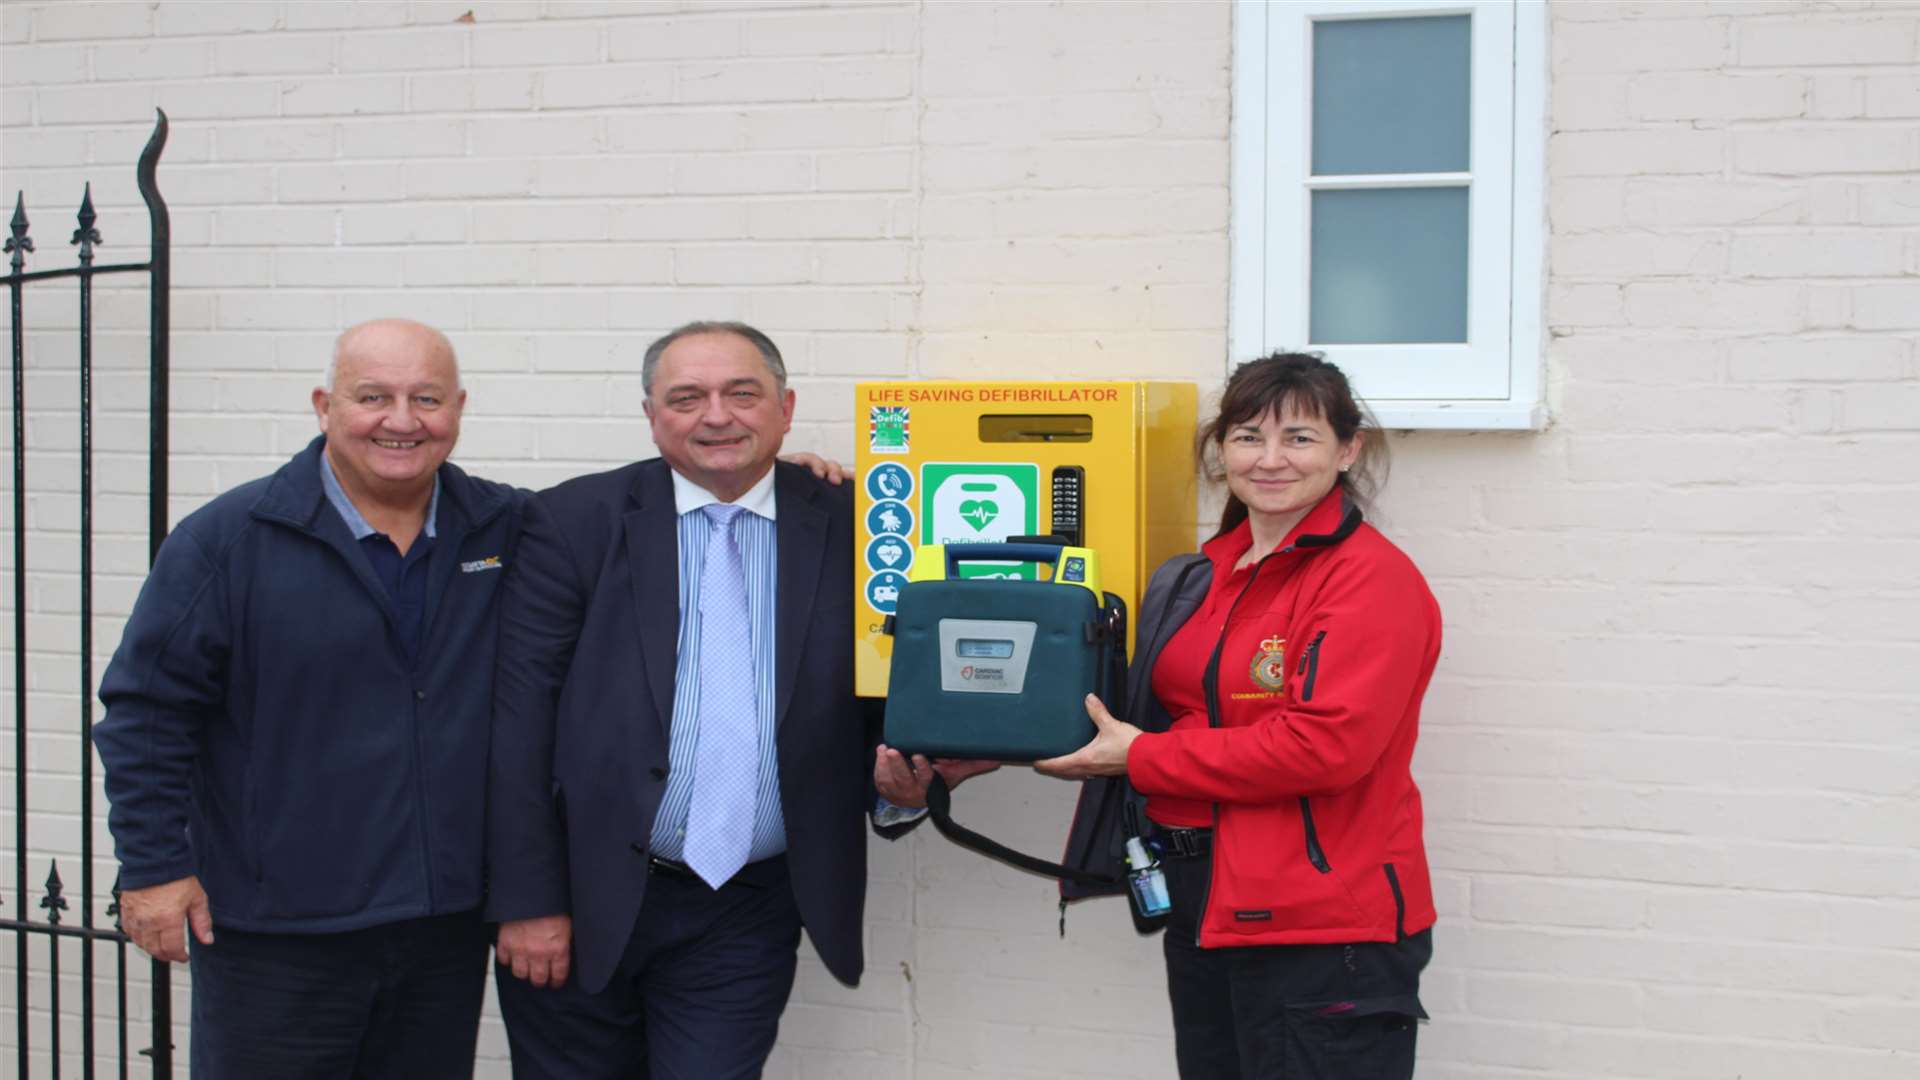 First aid trainer David Pinkney, pub owner John Walsh and first responder Zella Nerssessian with the new defibrillator outside The Five Bells in Ringwould